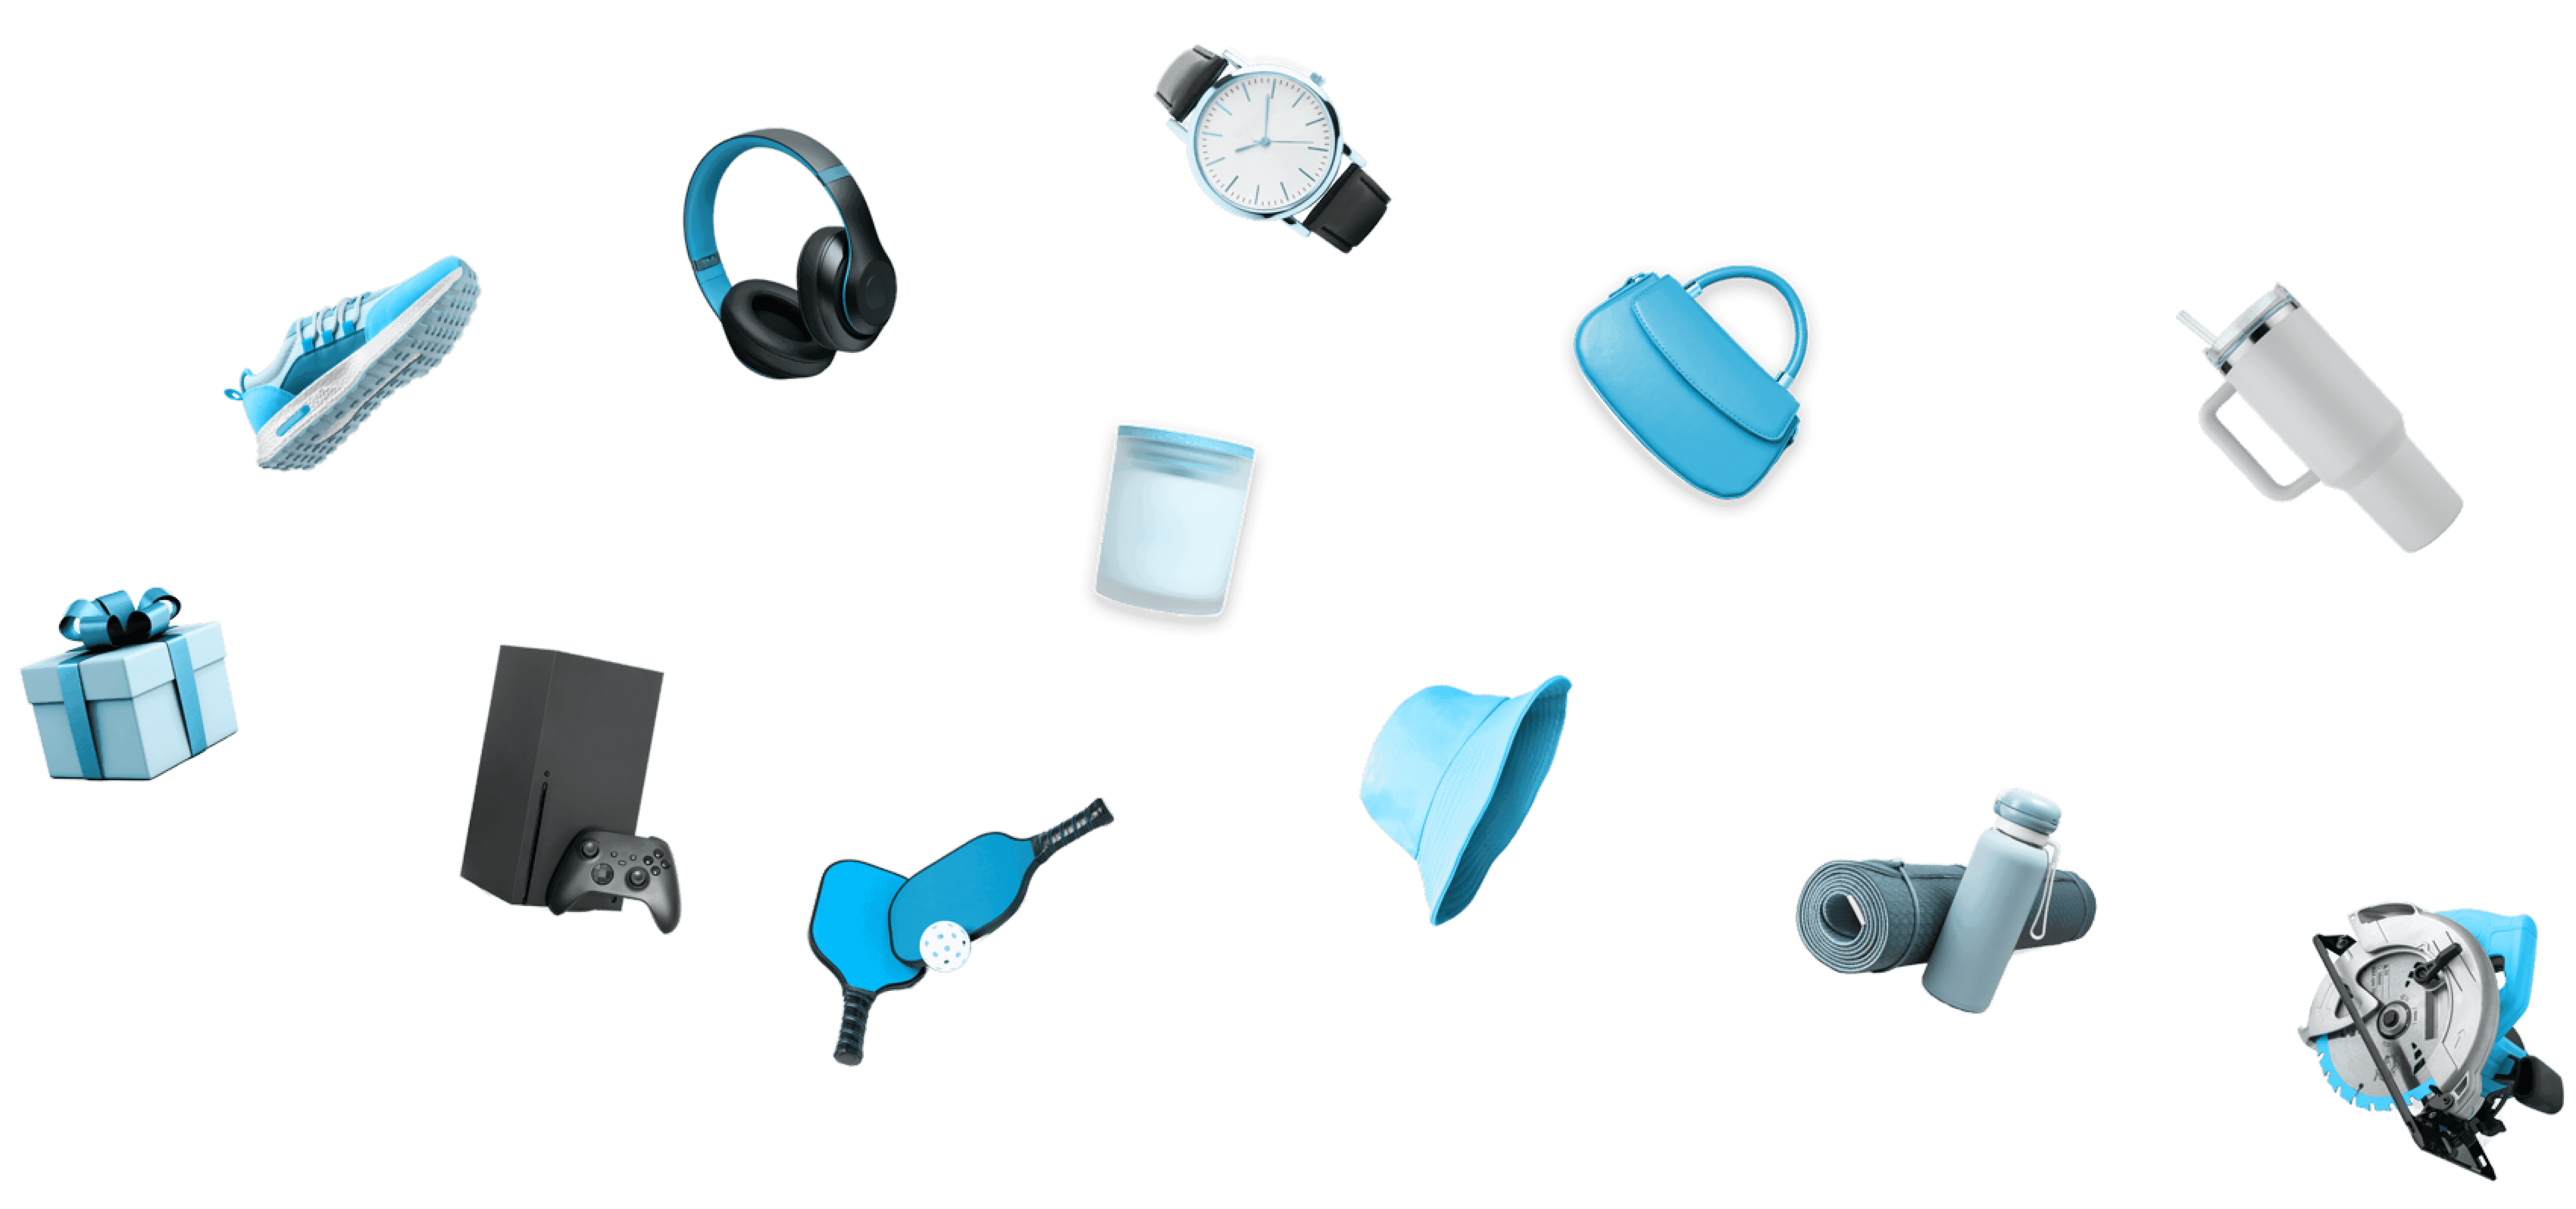 Image of several items that can be used to reward employees, like headphones and a gift box.